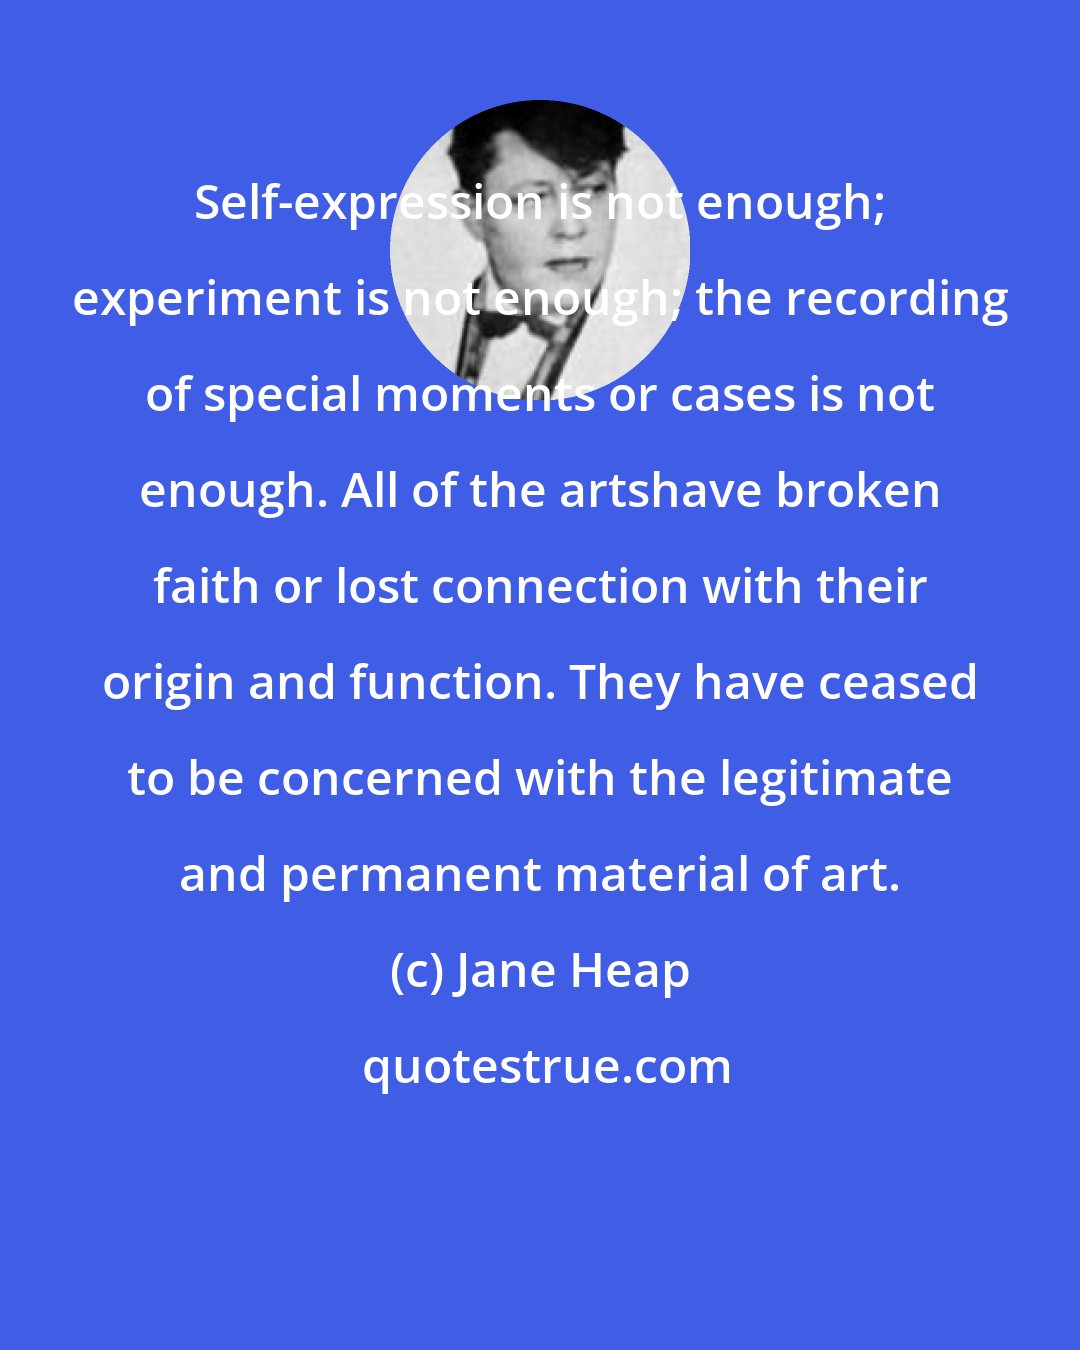 Jane Heap: Self-expression is not enough; experiment is not enough; the recording of special moments or cases is not enough. All of the artshave broken faith or lost connection with their origin and function. They have ceased to be concerned with the legitimate and permanent material of art.